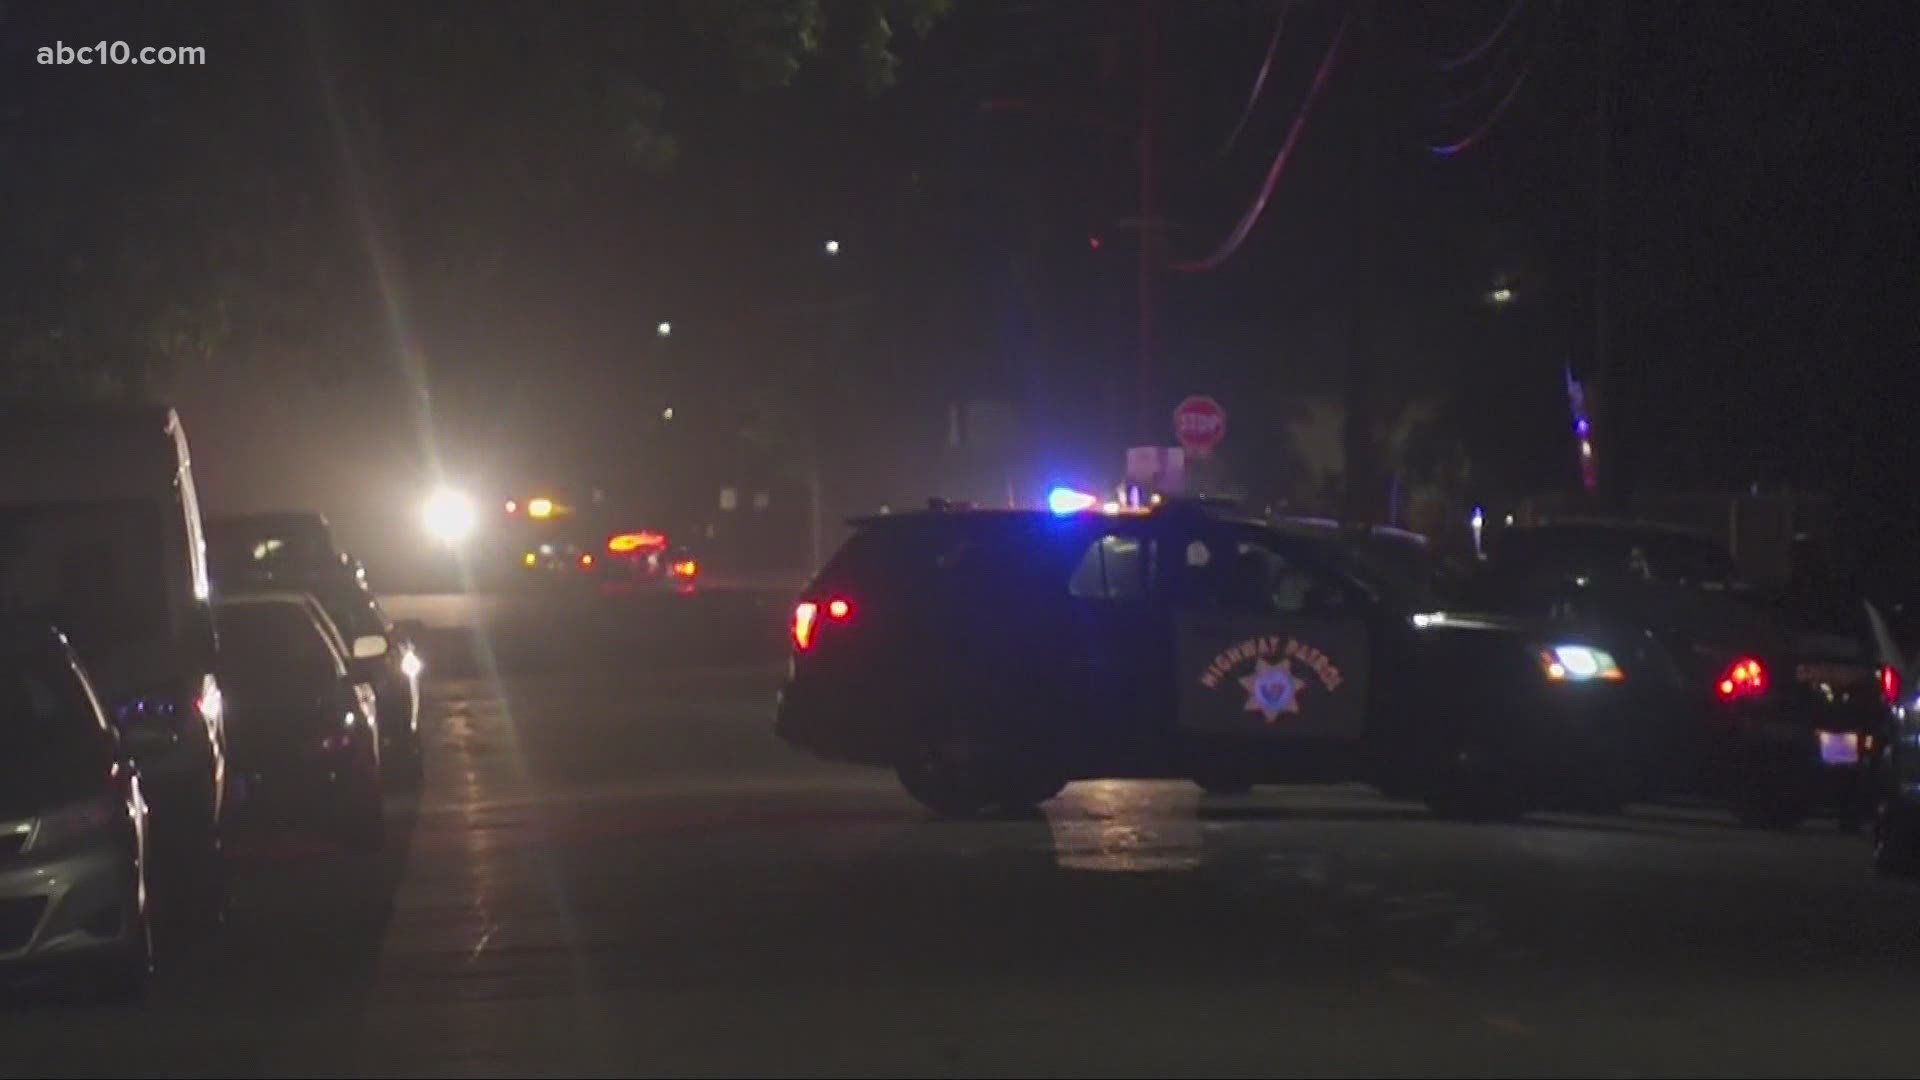 Officer Ruben Jones, a CHP-Stockton spokesperson, said someone was shooting at the officer and ended up hitting a CHP patrol car. The incident happened around 9 p.m.